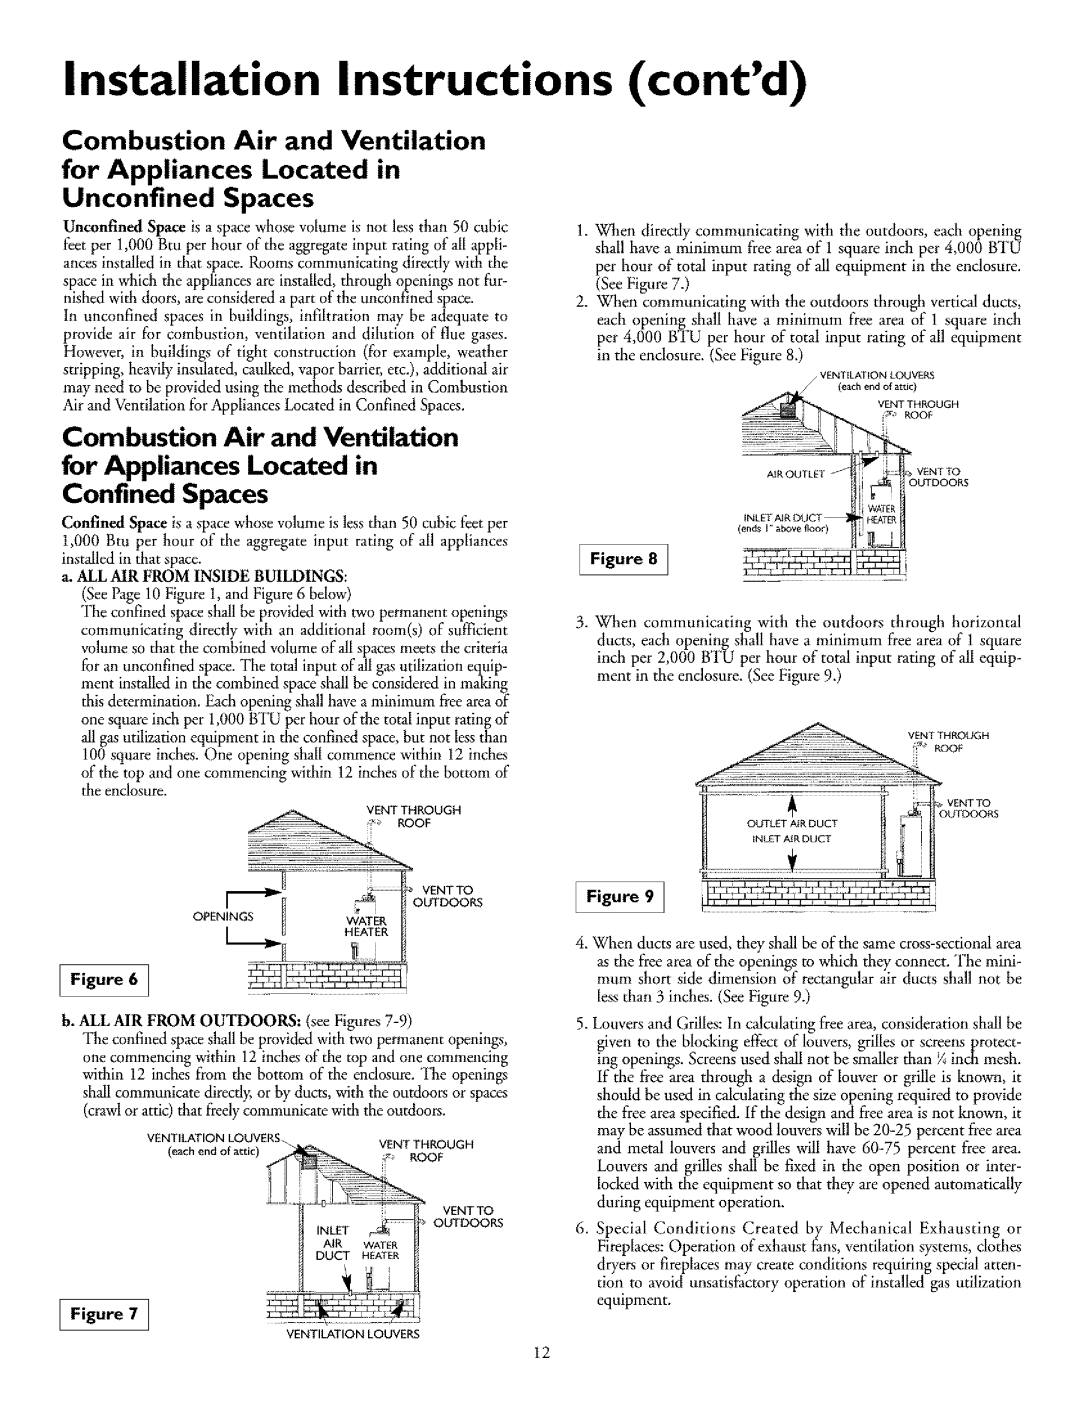 Kenmore 153.33298, 153.33296, 153.332870HA Installation Instructions contd, Combustion Air and Ventilation, Figure 